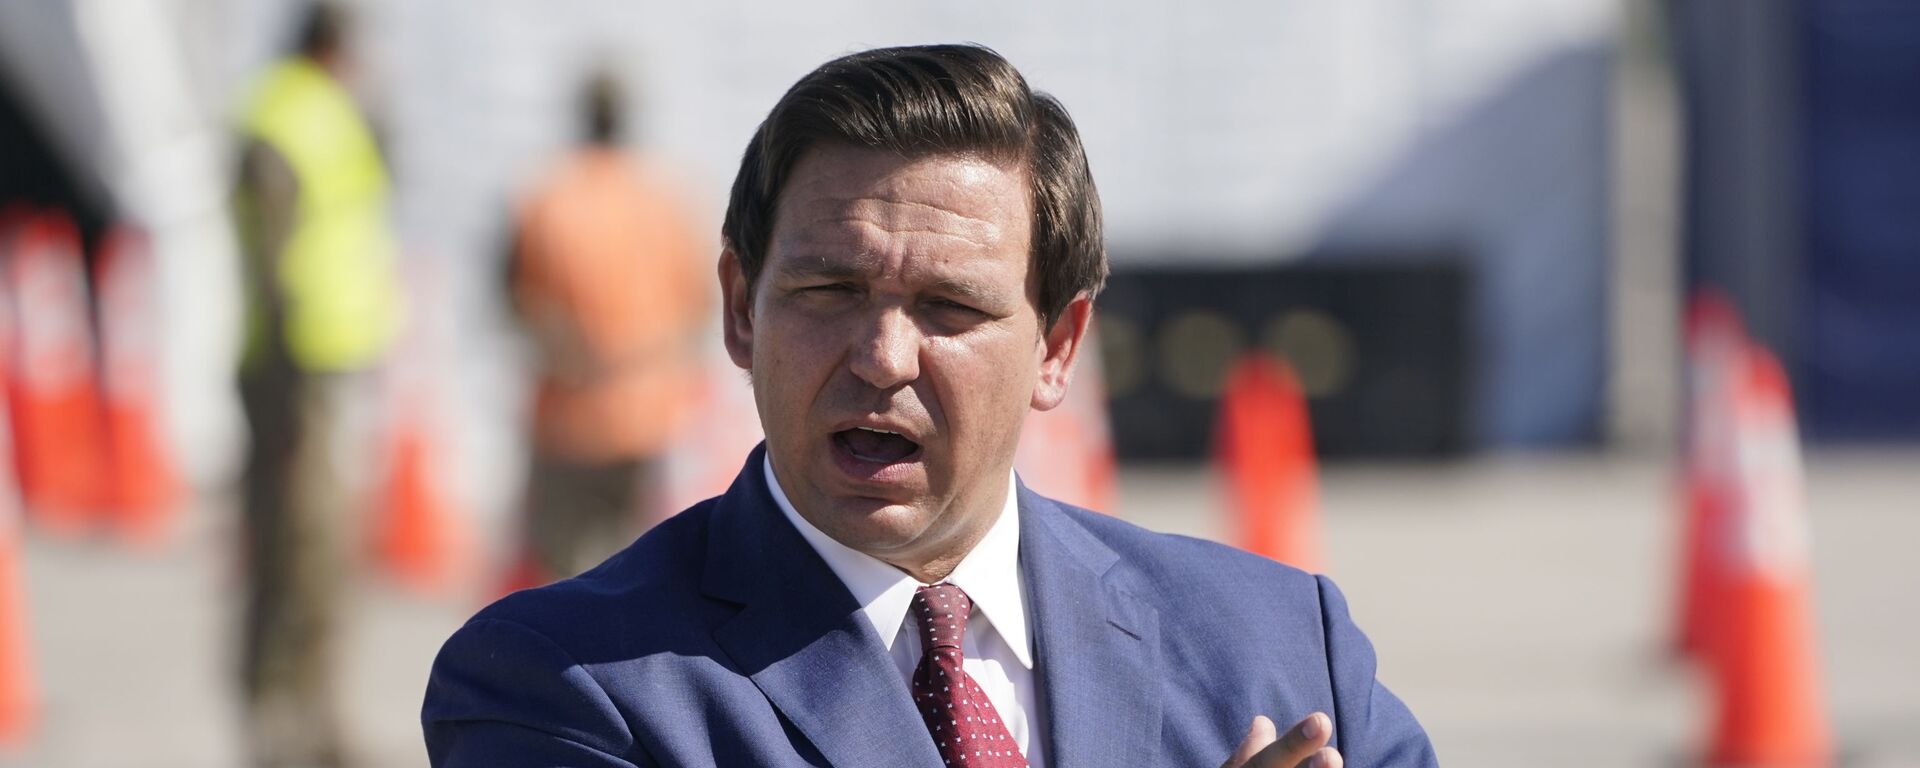 Florida Gov. Ron DeSantis speaks at a COVID-19 testing site, Wednesday, Jan. 6, 2021, outside Hard Rock Stadium in Miami Gardens, Fla. First responders and people over 65 years-old began receiving the COVID-19 vaccine Wednesday during a trial run of the site which will open to seniors at a later date. (AP Photo/Wilfredo Lee) - Sputnik International, 1920, 02.04.2021